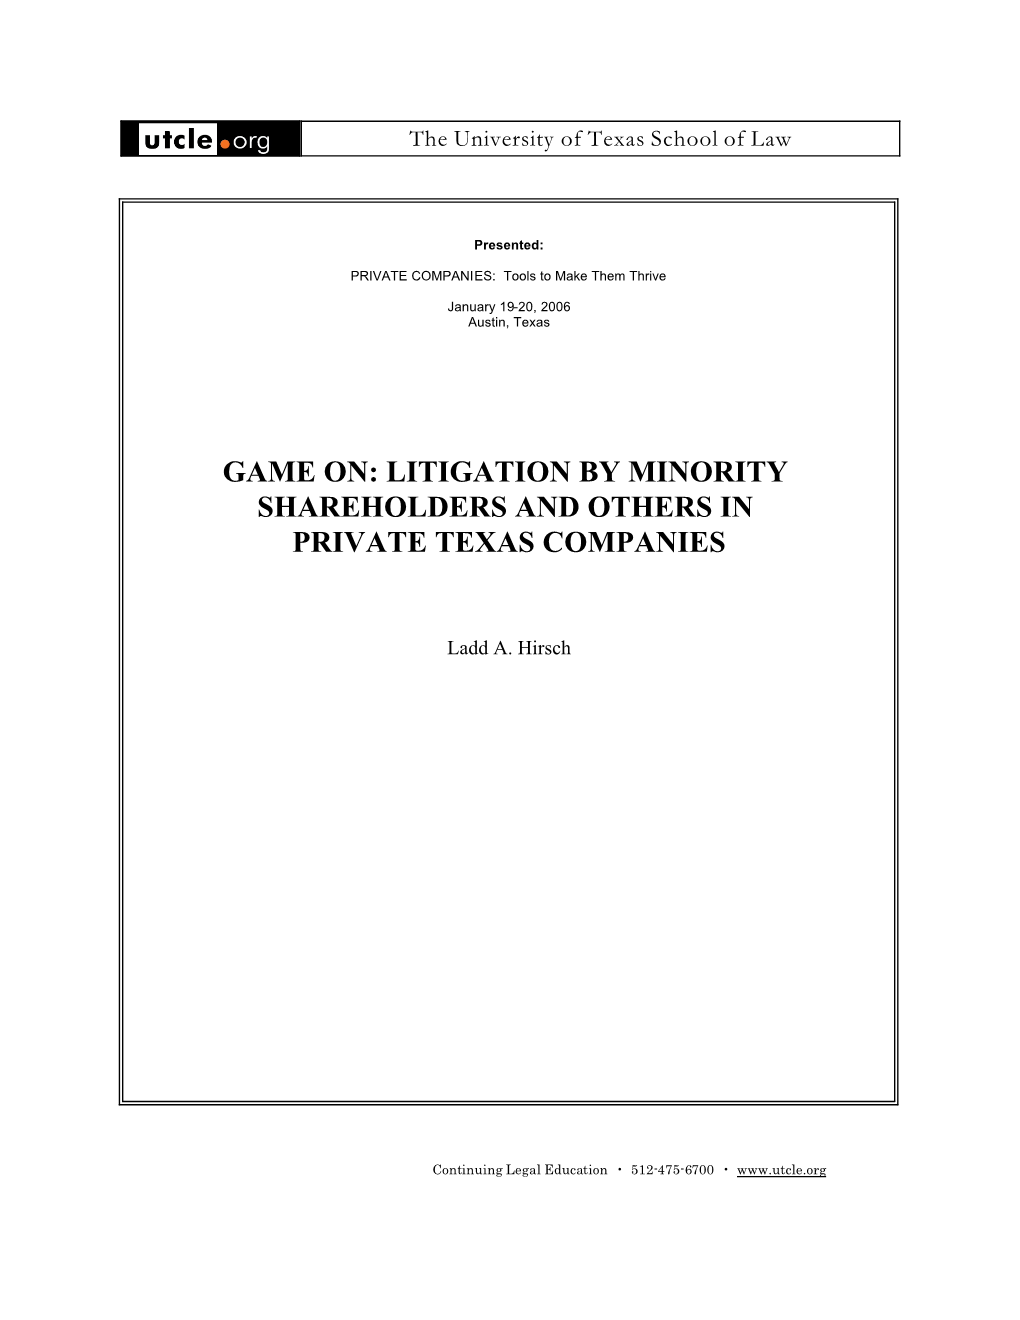 Litigation by Minority Shareholders and Others in Private Texas Companies